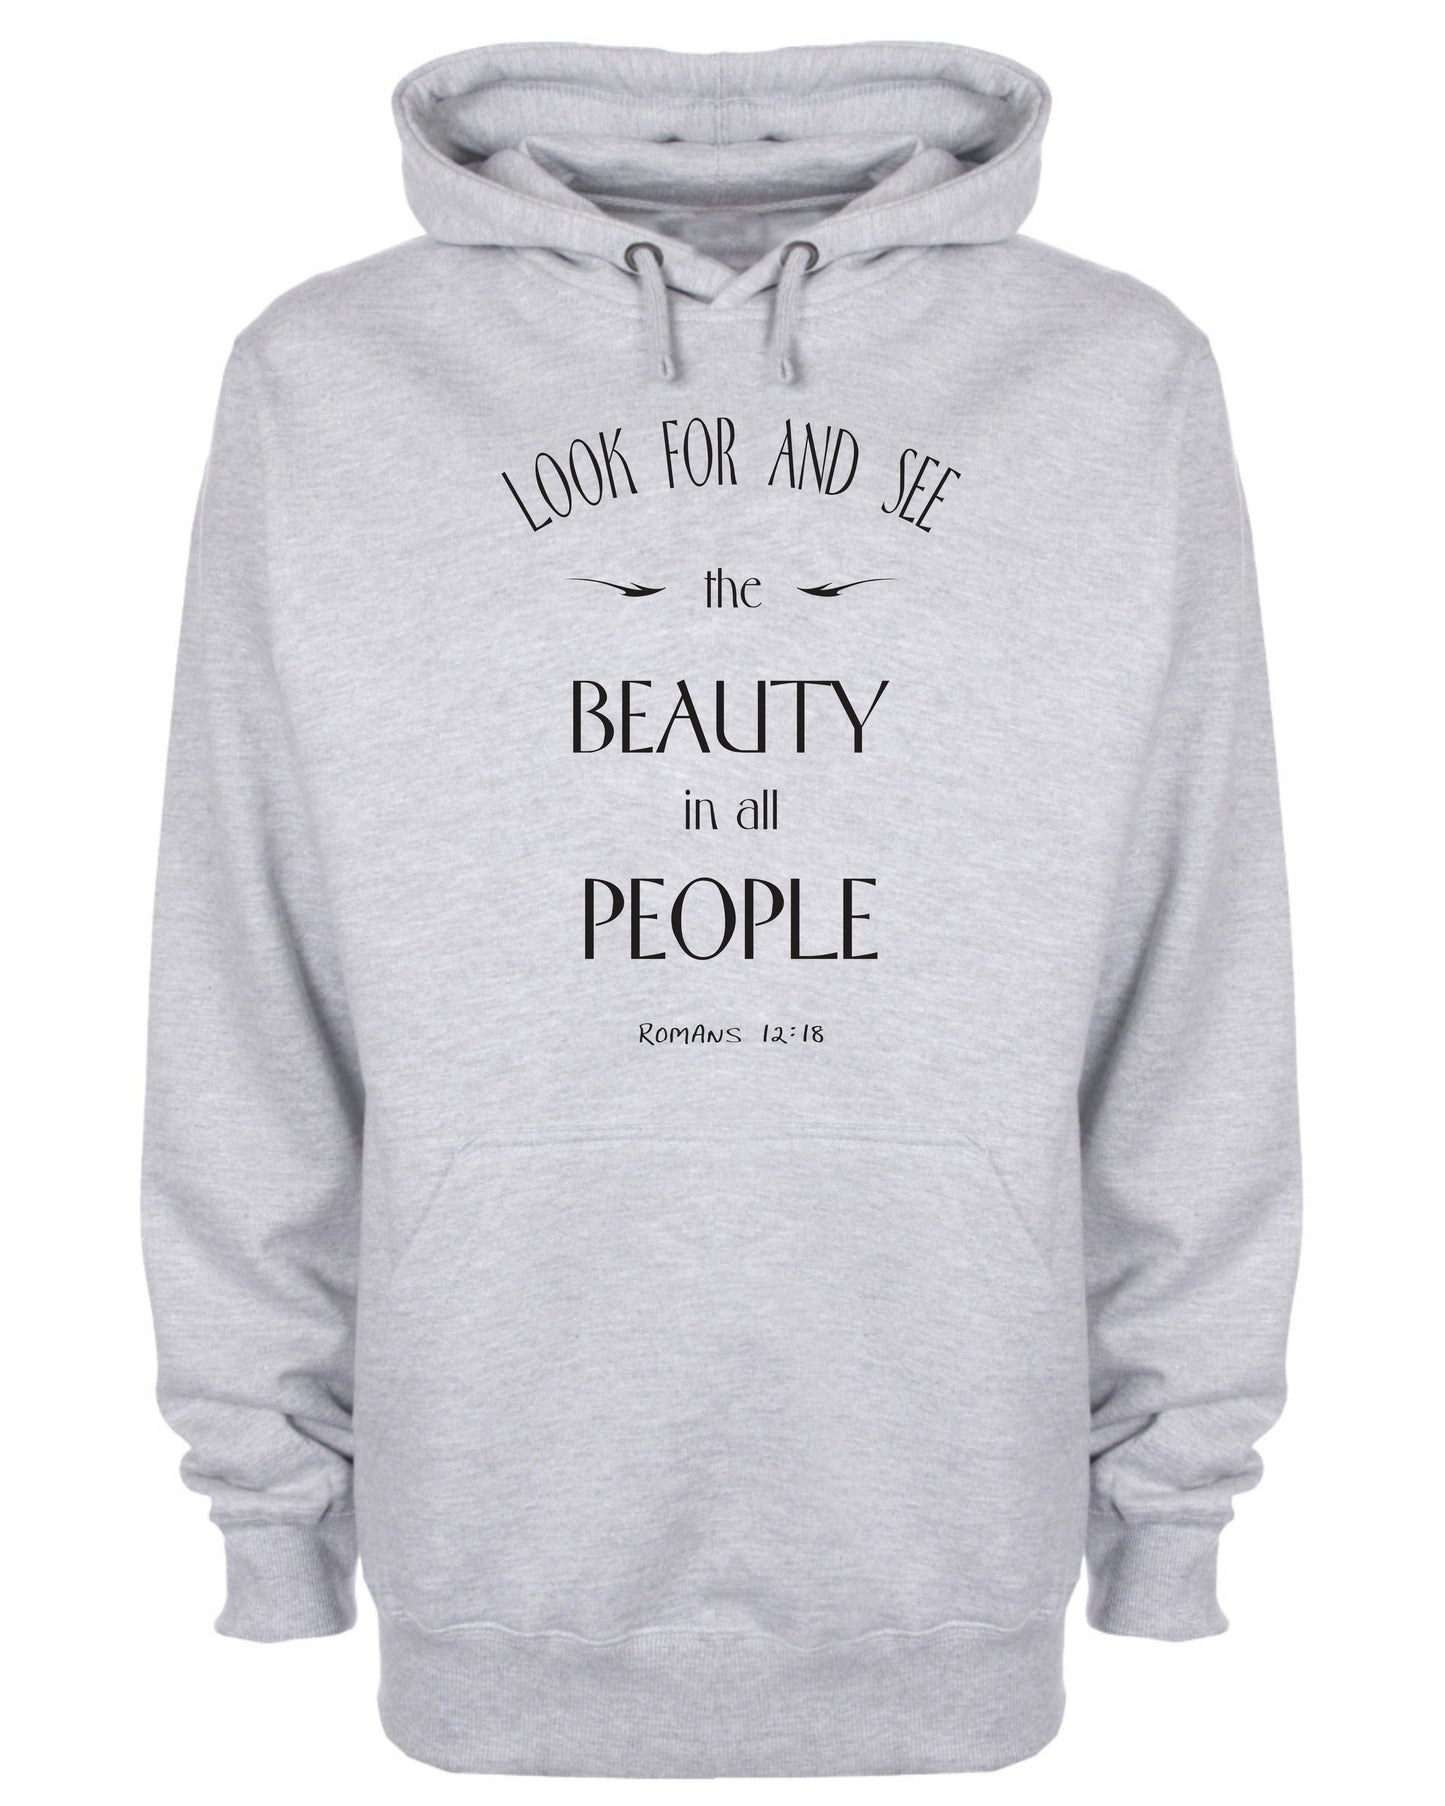 Look For And See The Beauty In All People Hoodie Bible Scripture Christian